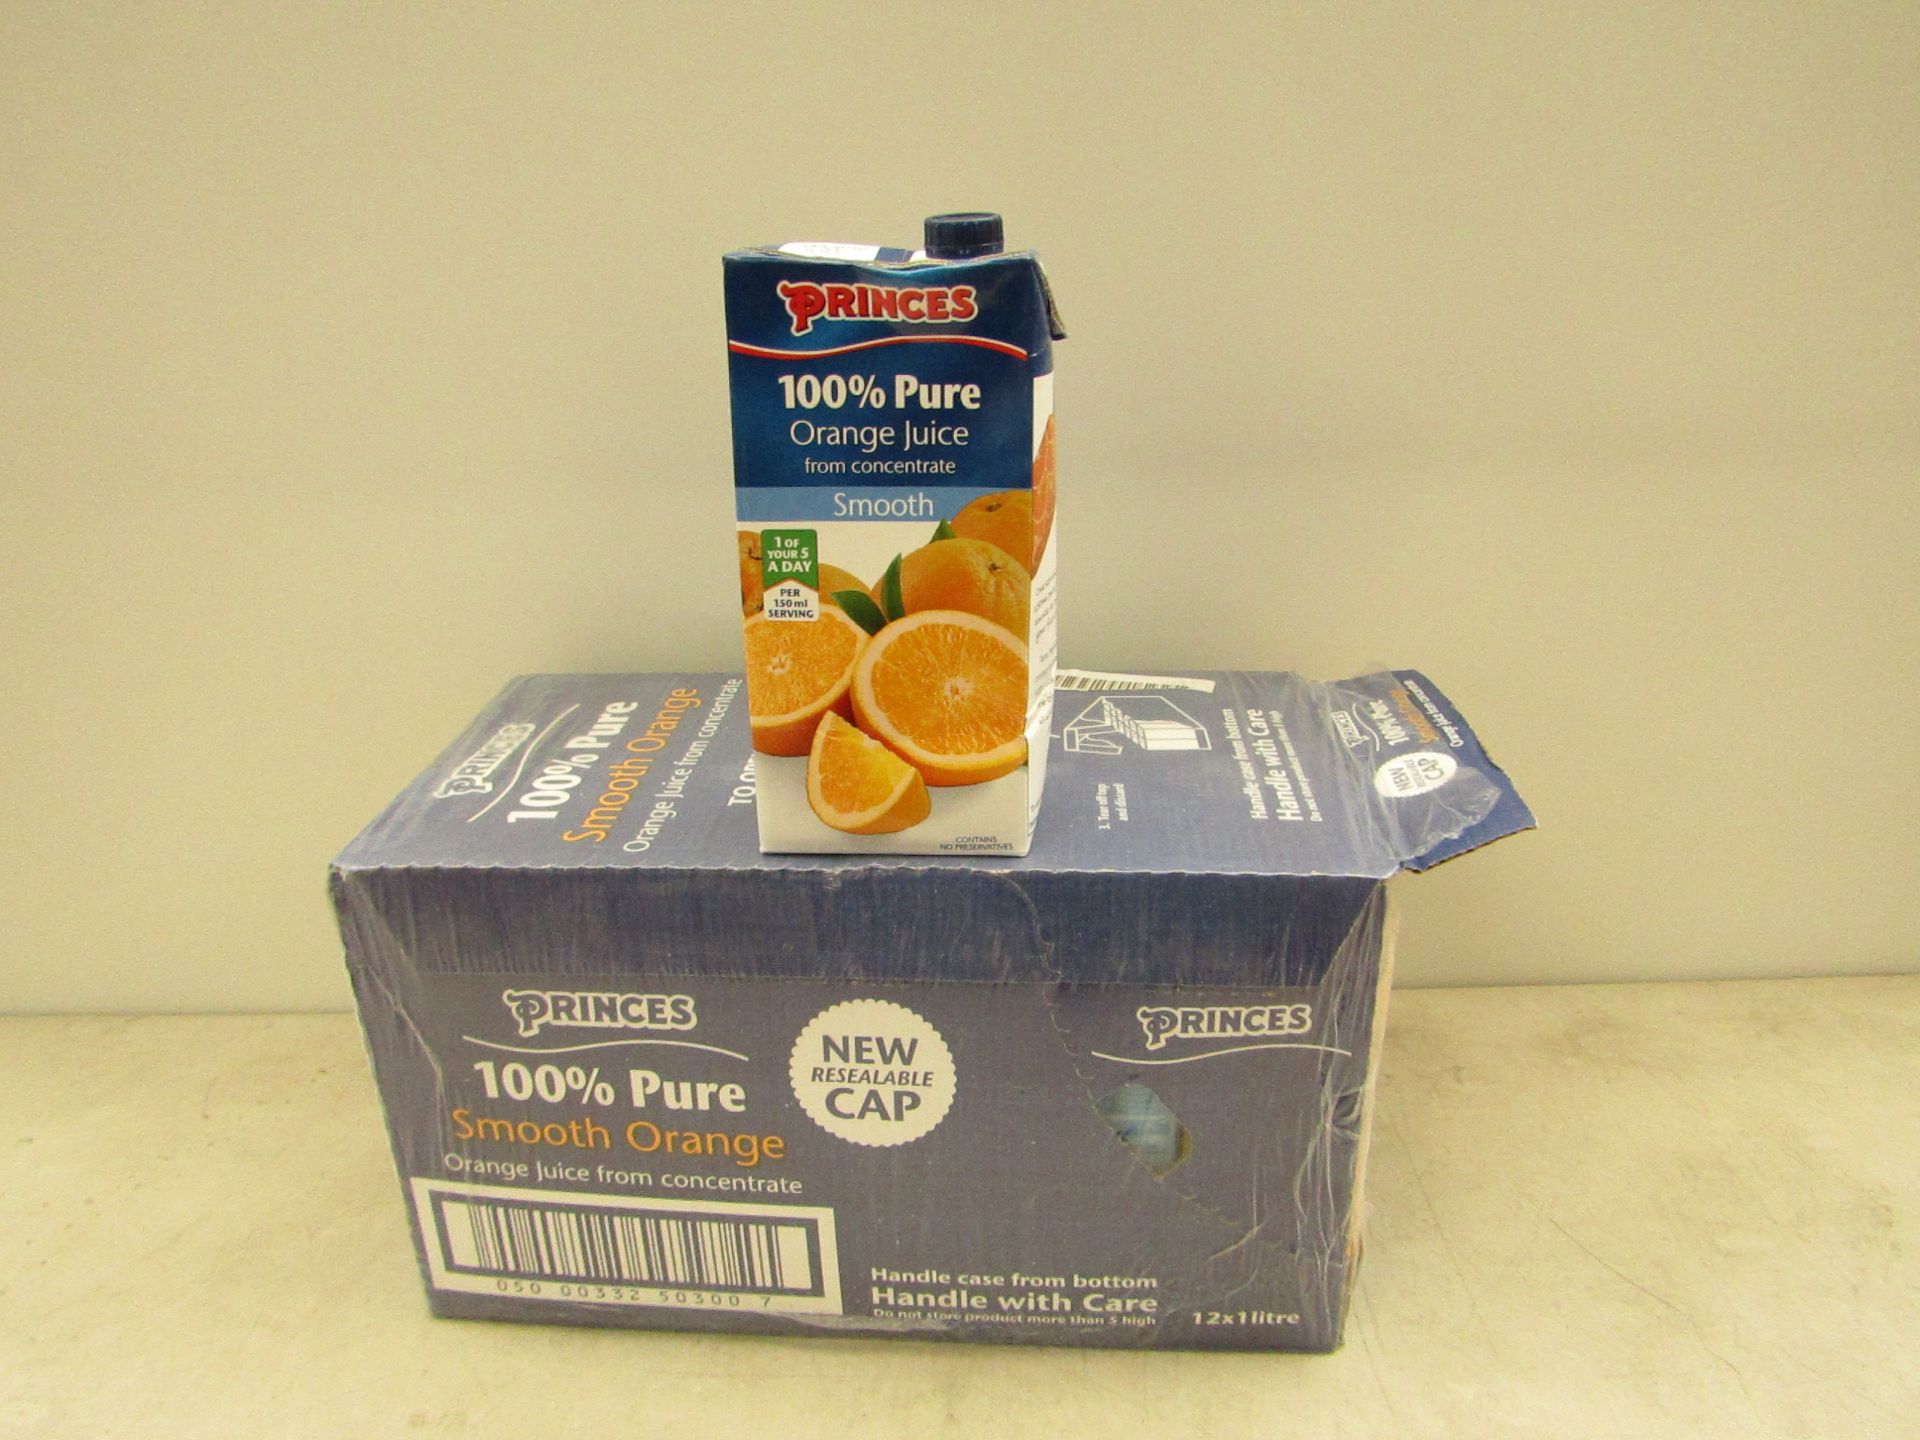 12x 1L (12L total) Princes 100% pure smooth orange juice, new, unable to find BB date.